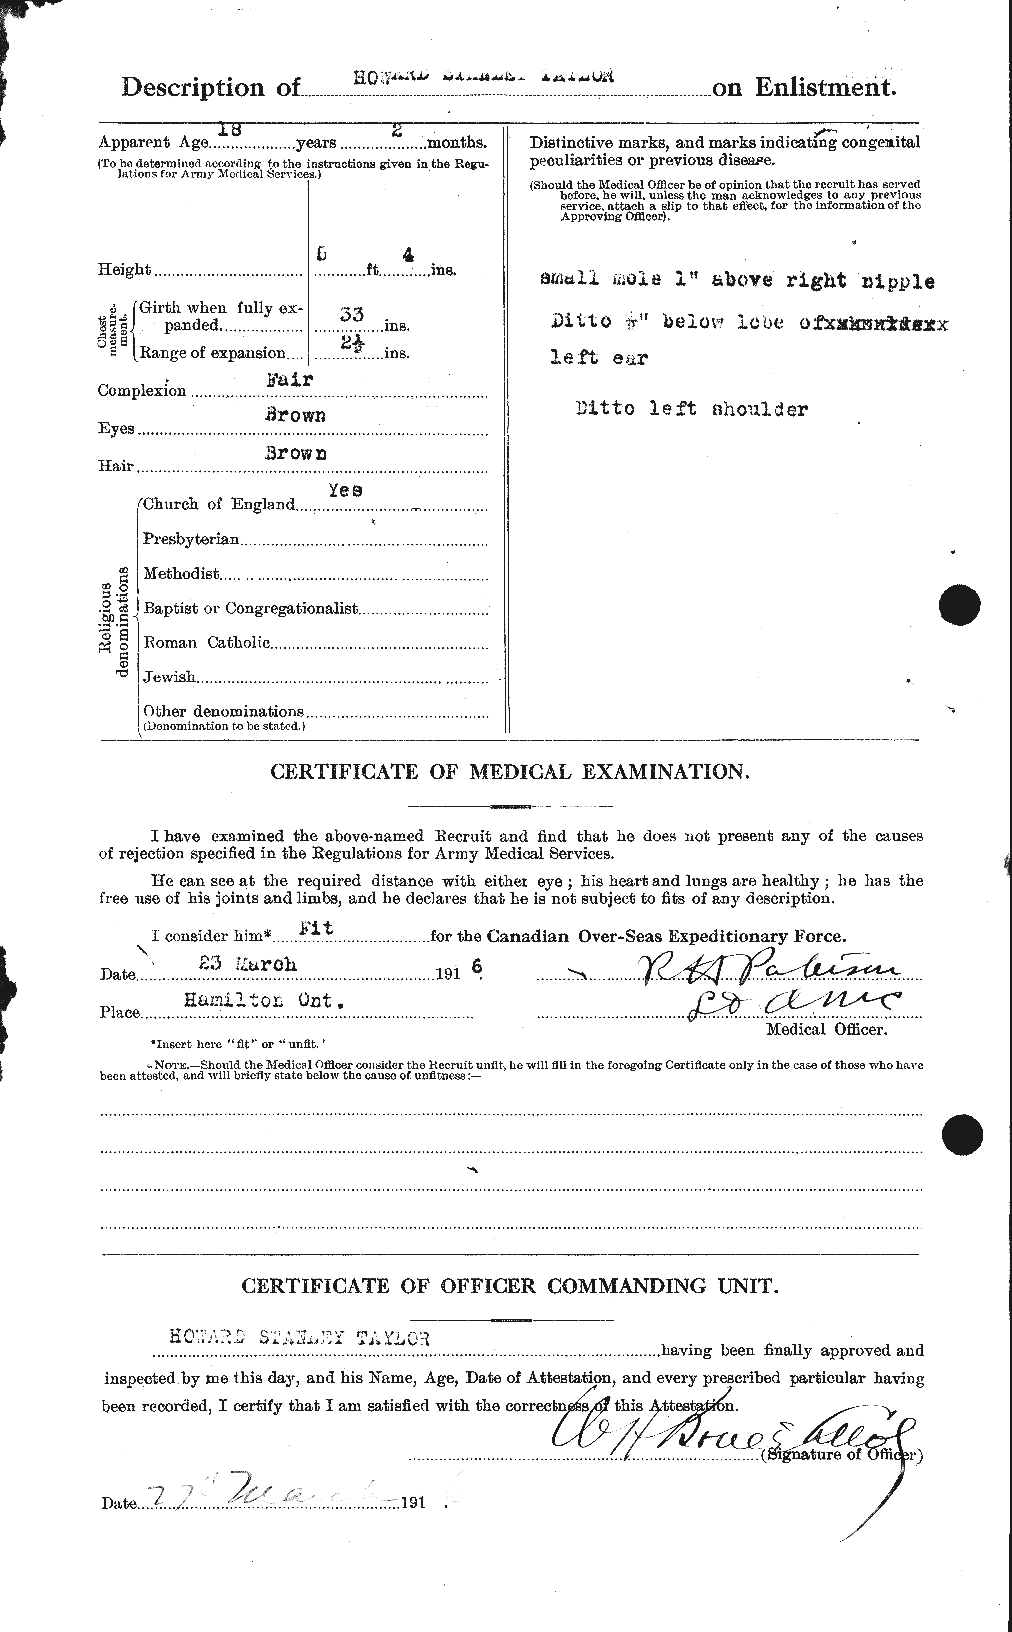 Personnel Records of the First World War - CEF 626603b